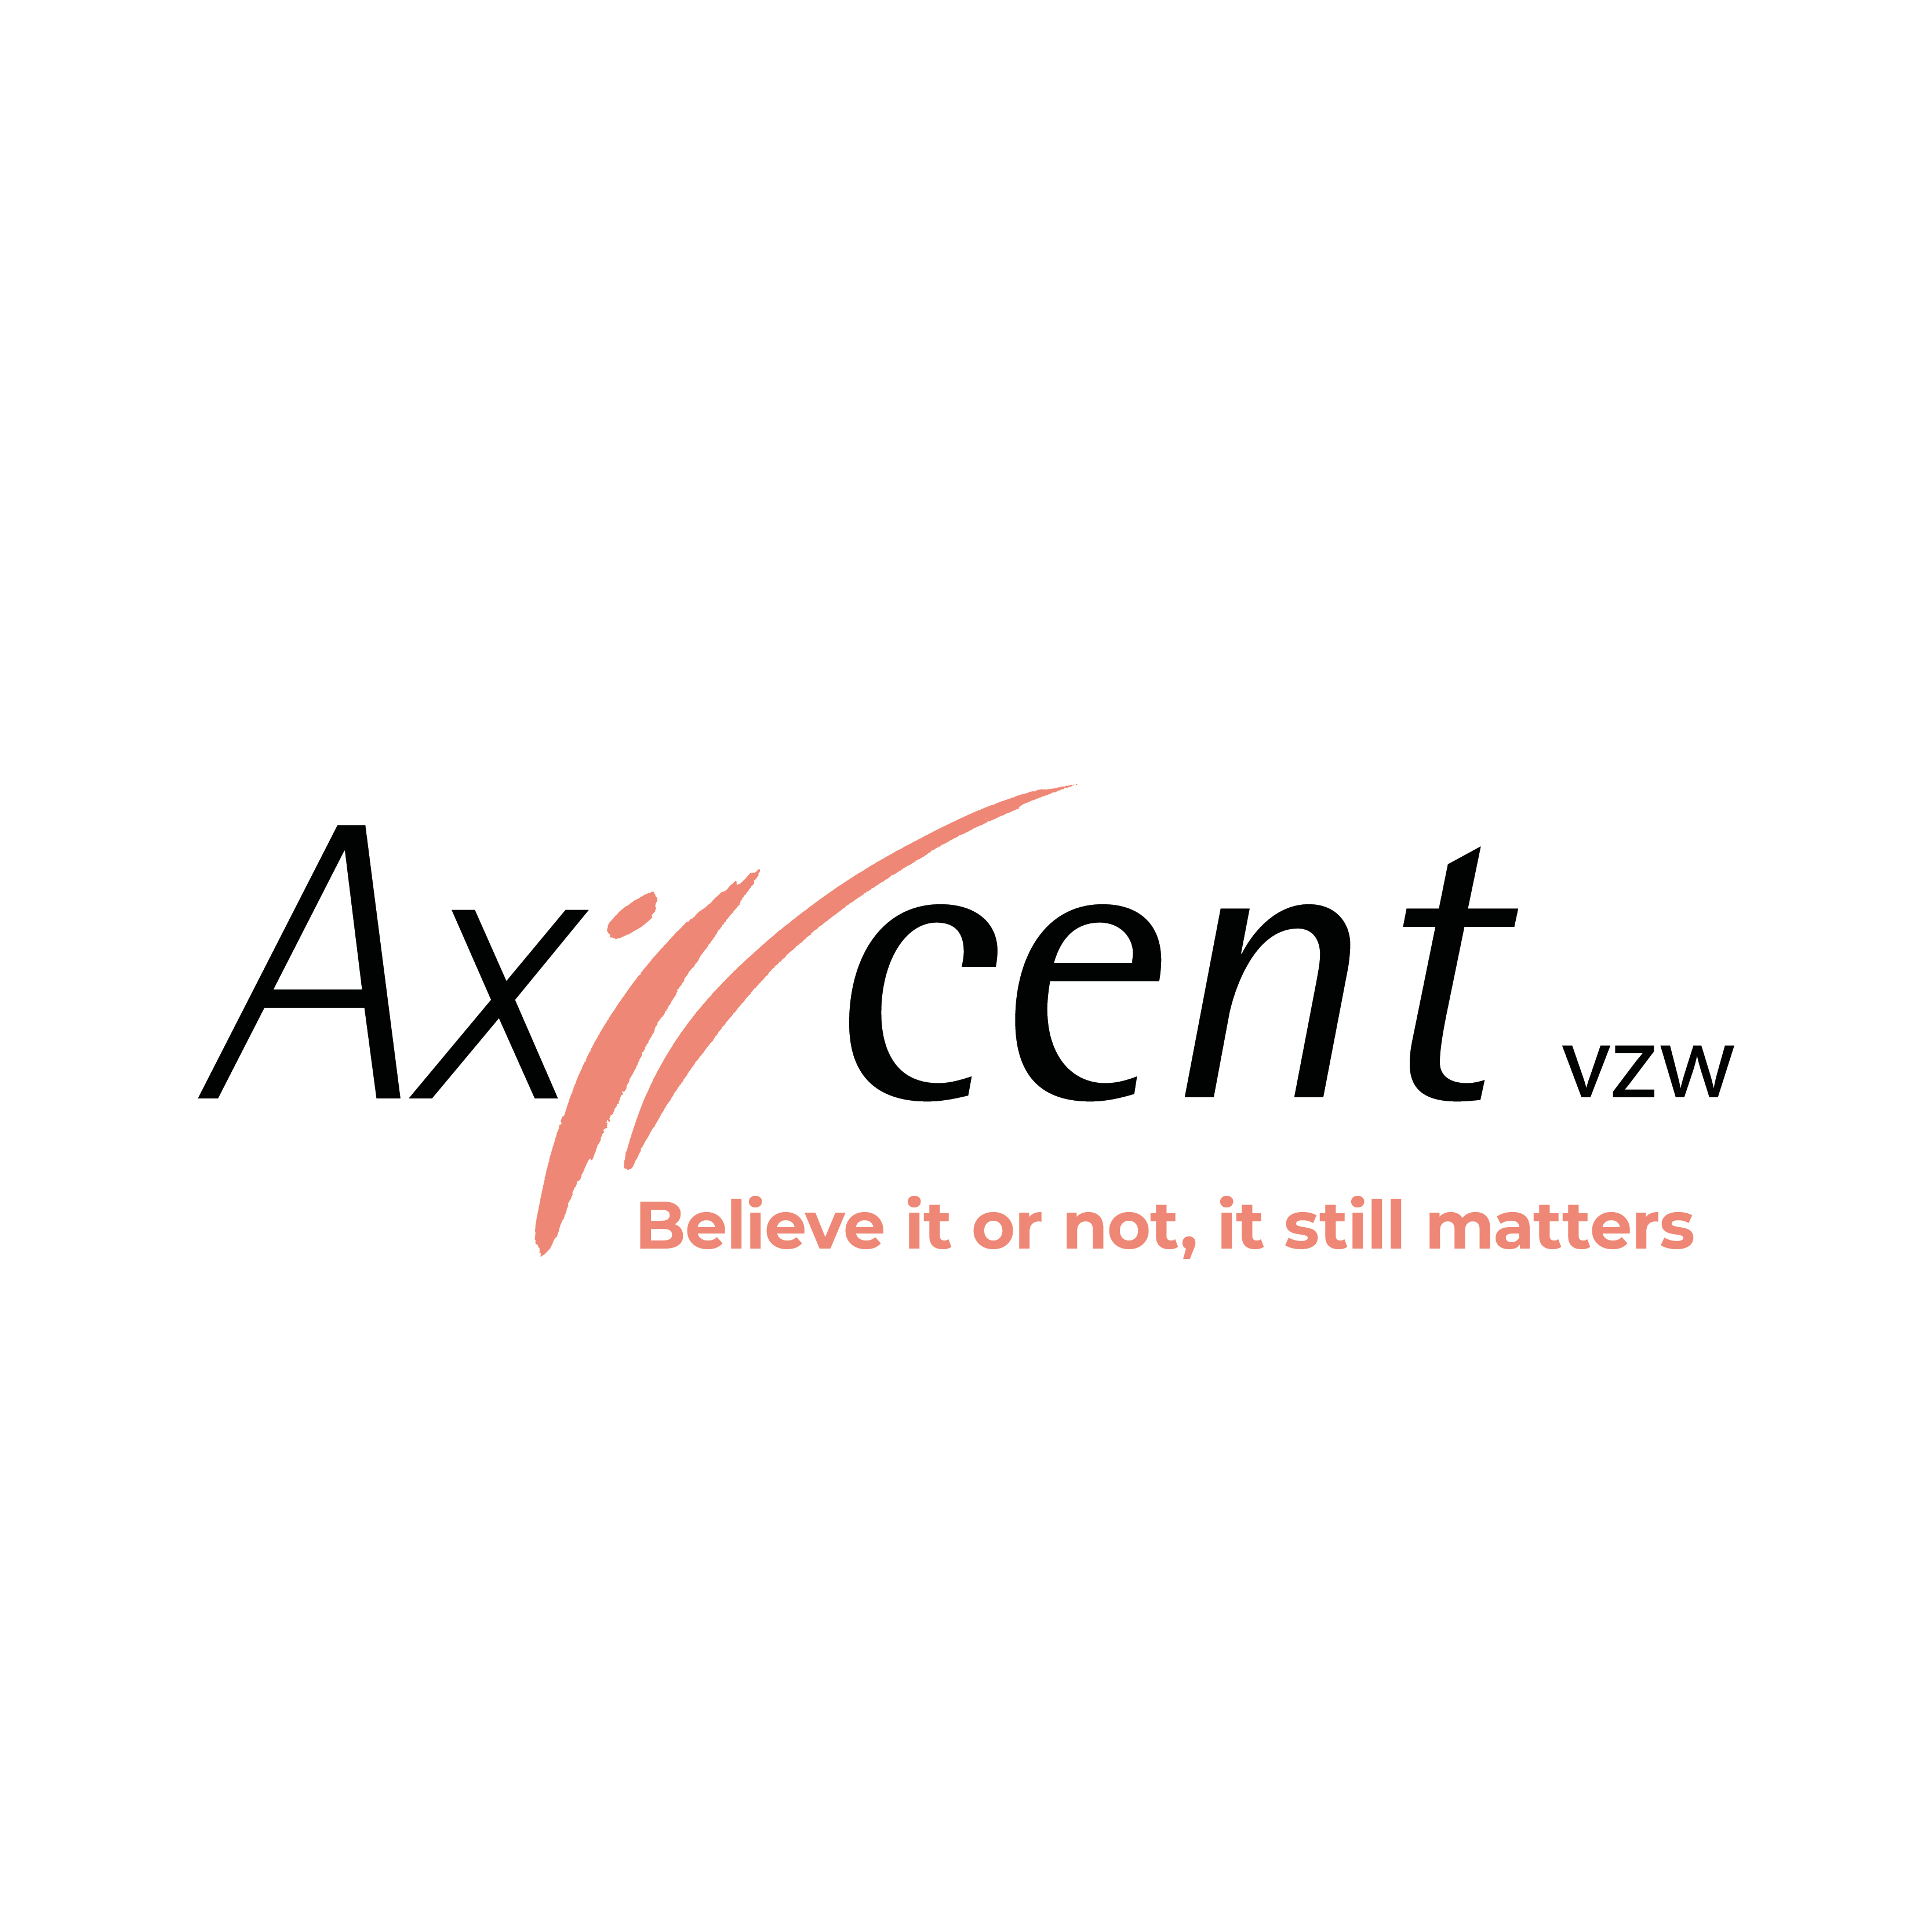 Logo Axcent vzw